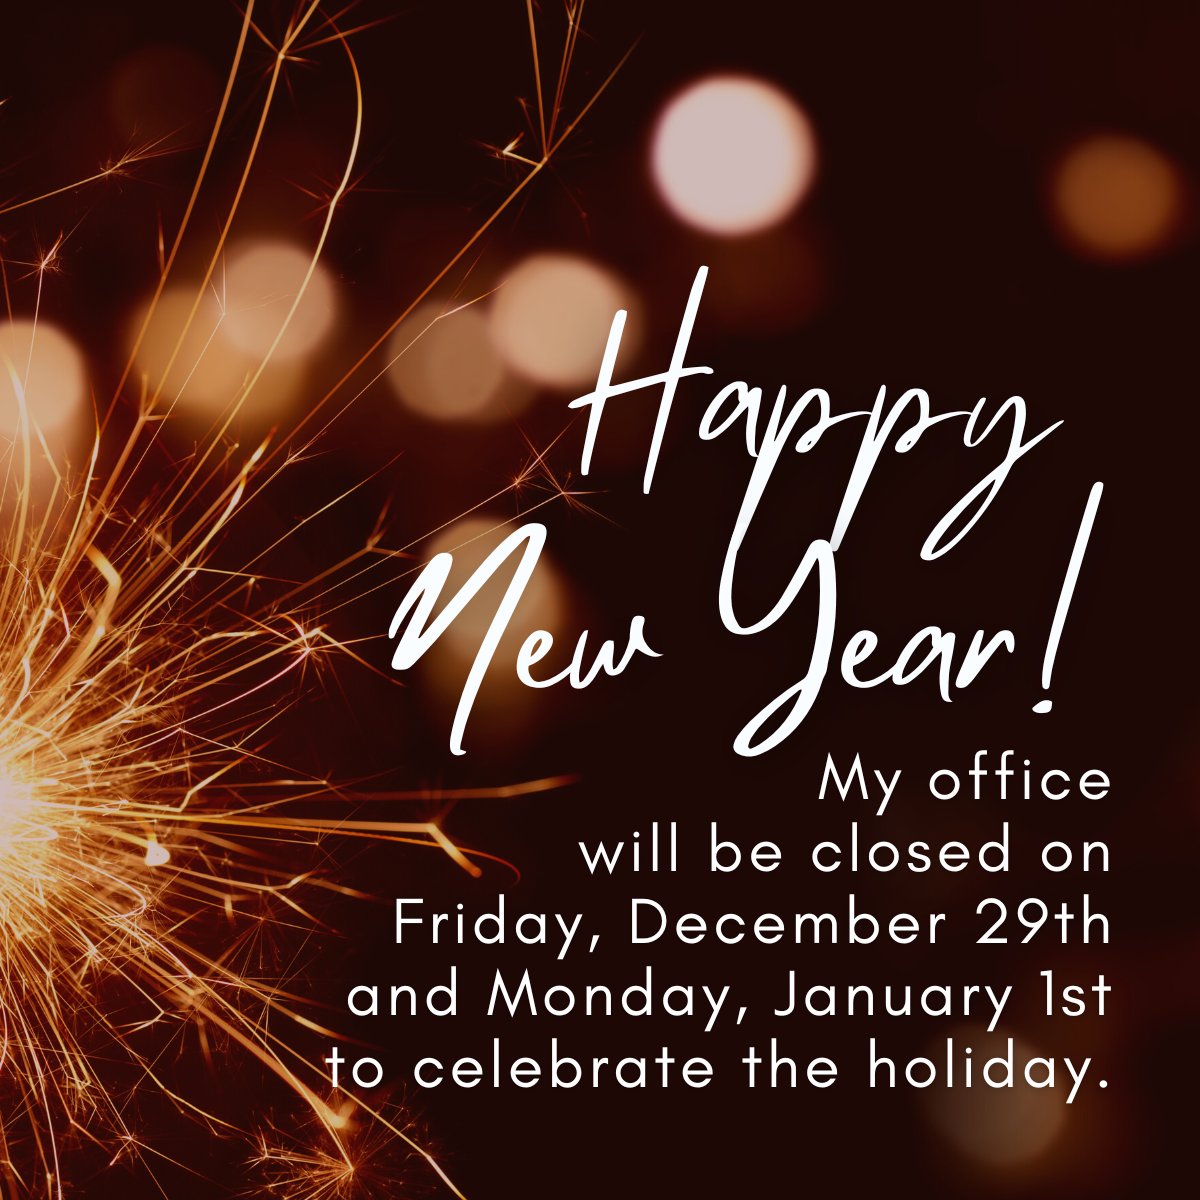 My office will be closed on Friday, December 29th and Monday, January 1st.